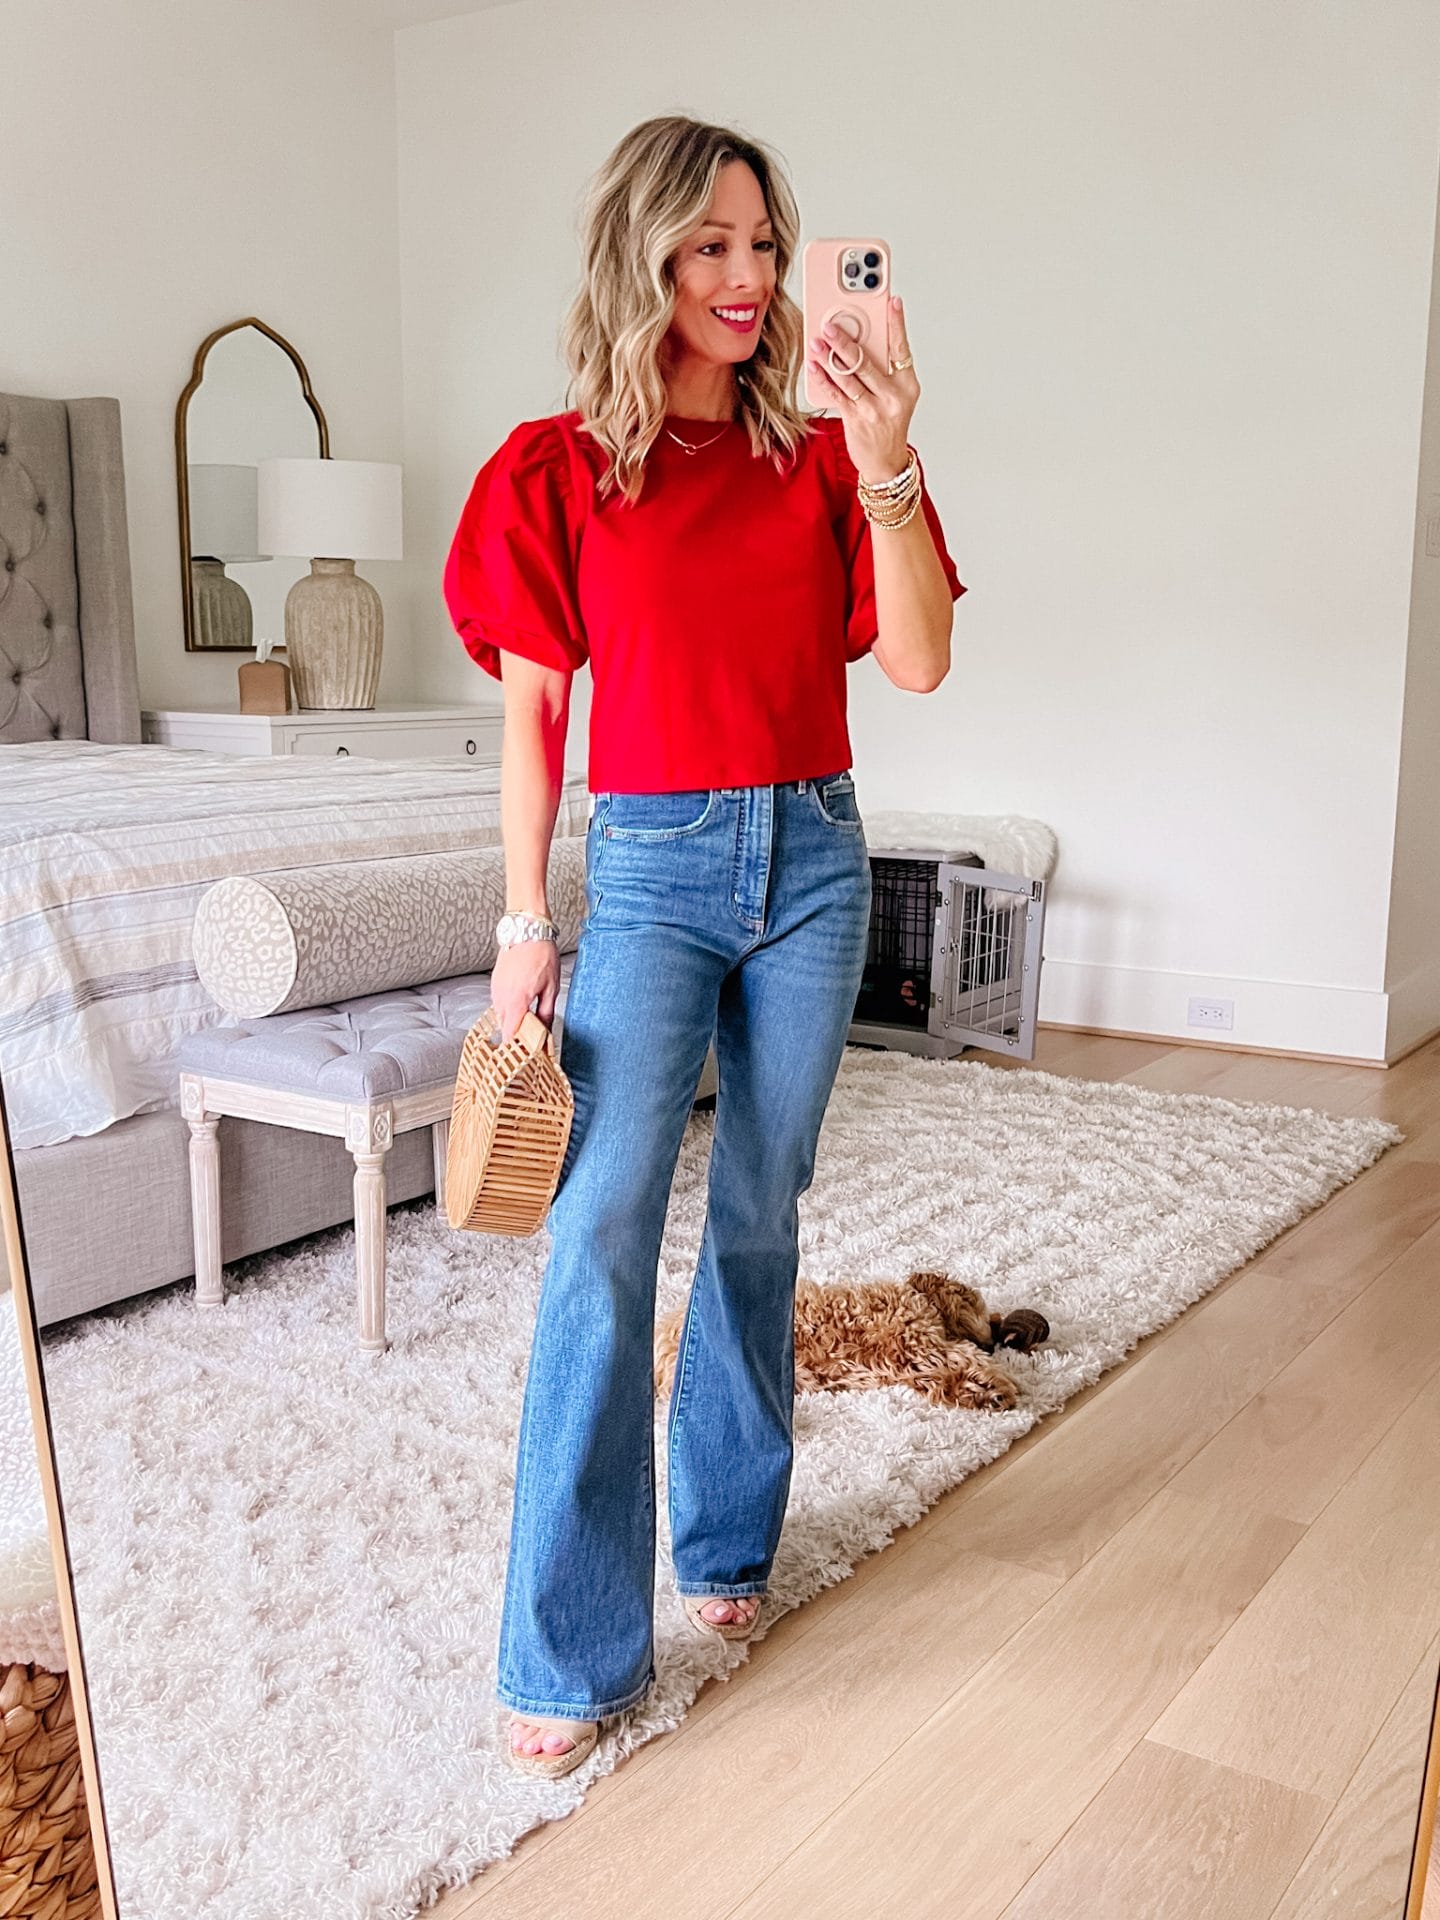 Red Puff Top, Jeans Wedges 